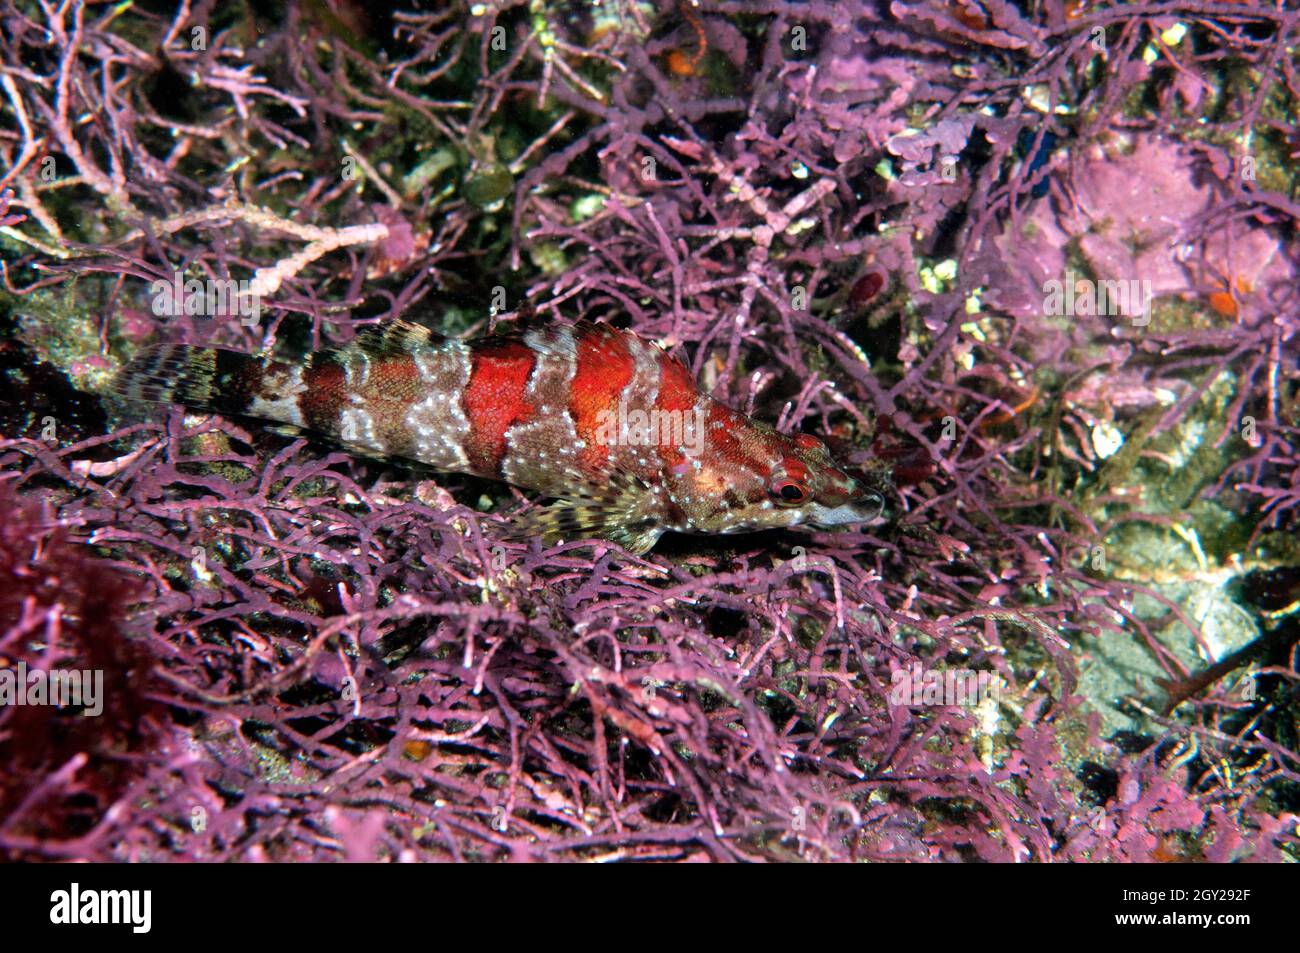 Painted greenling kelpfish, Oxylebius pictus, on a bed of purple algae, Point Lobos State Natural Reserve, California, USA Stock Photo